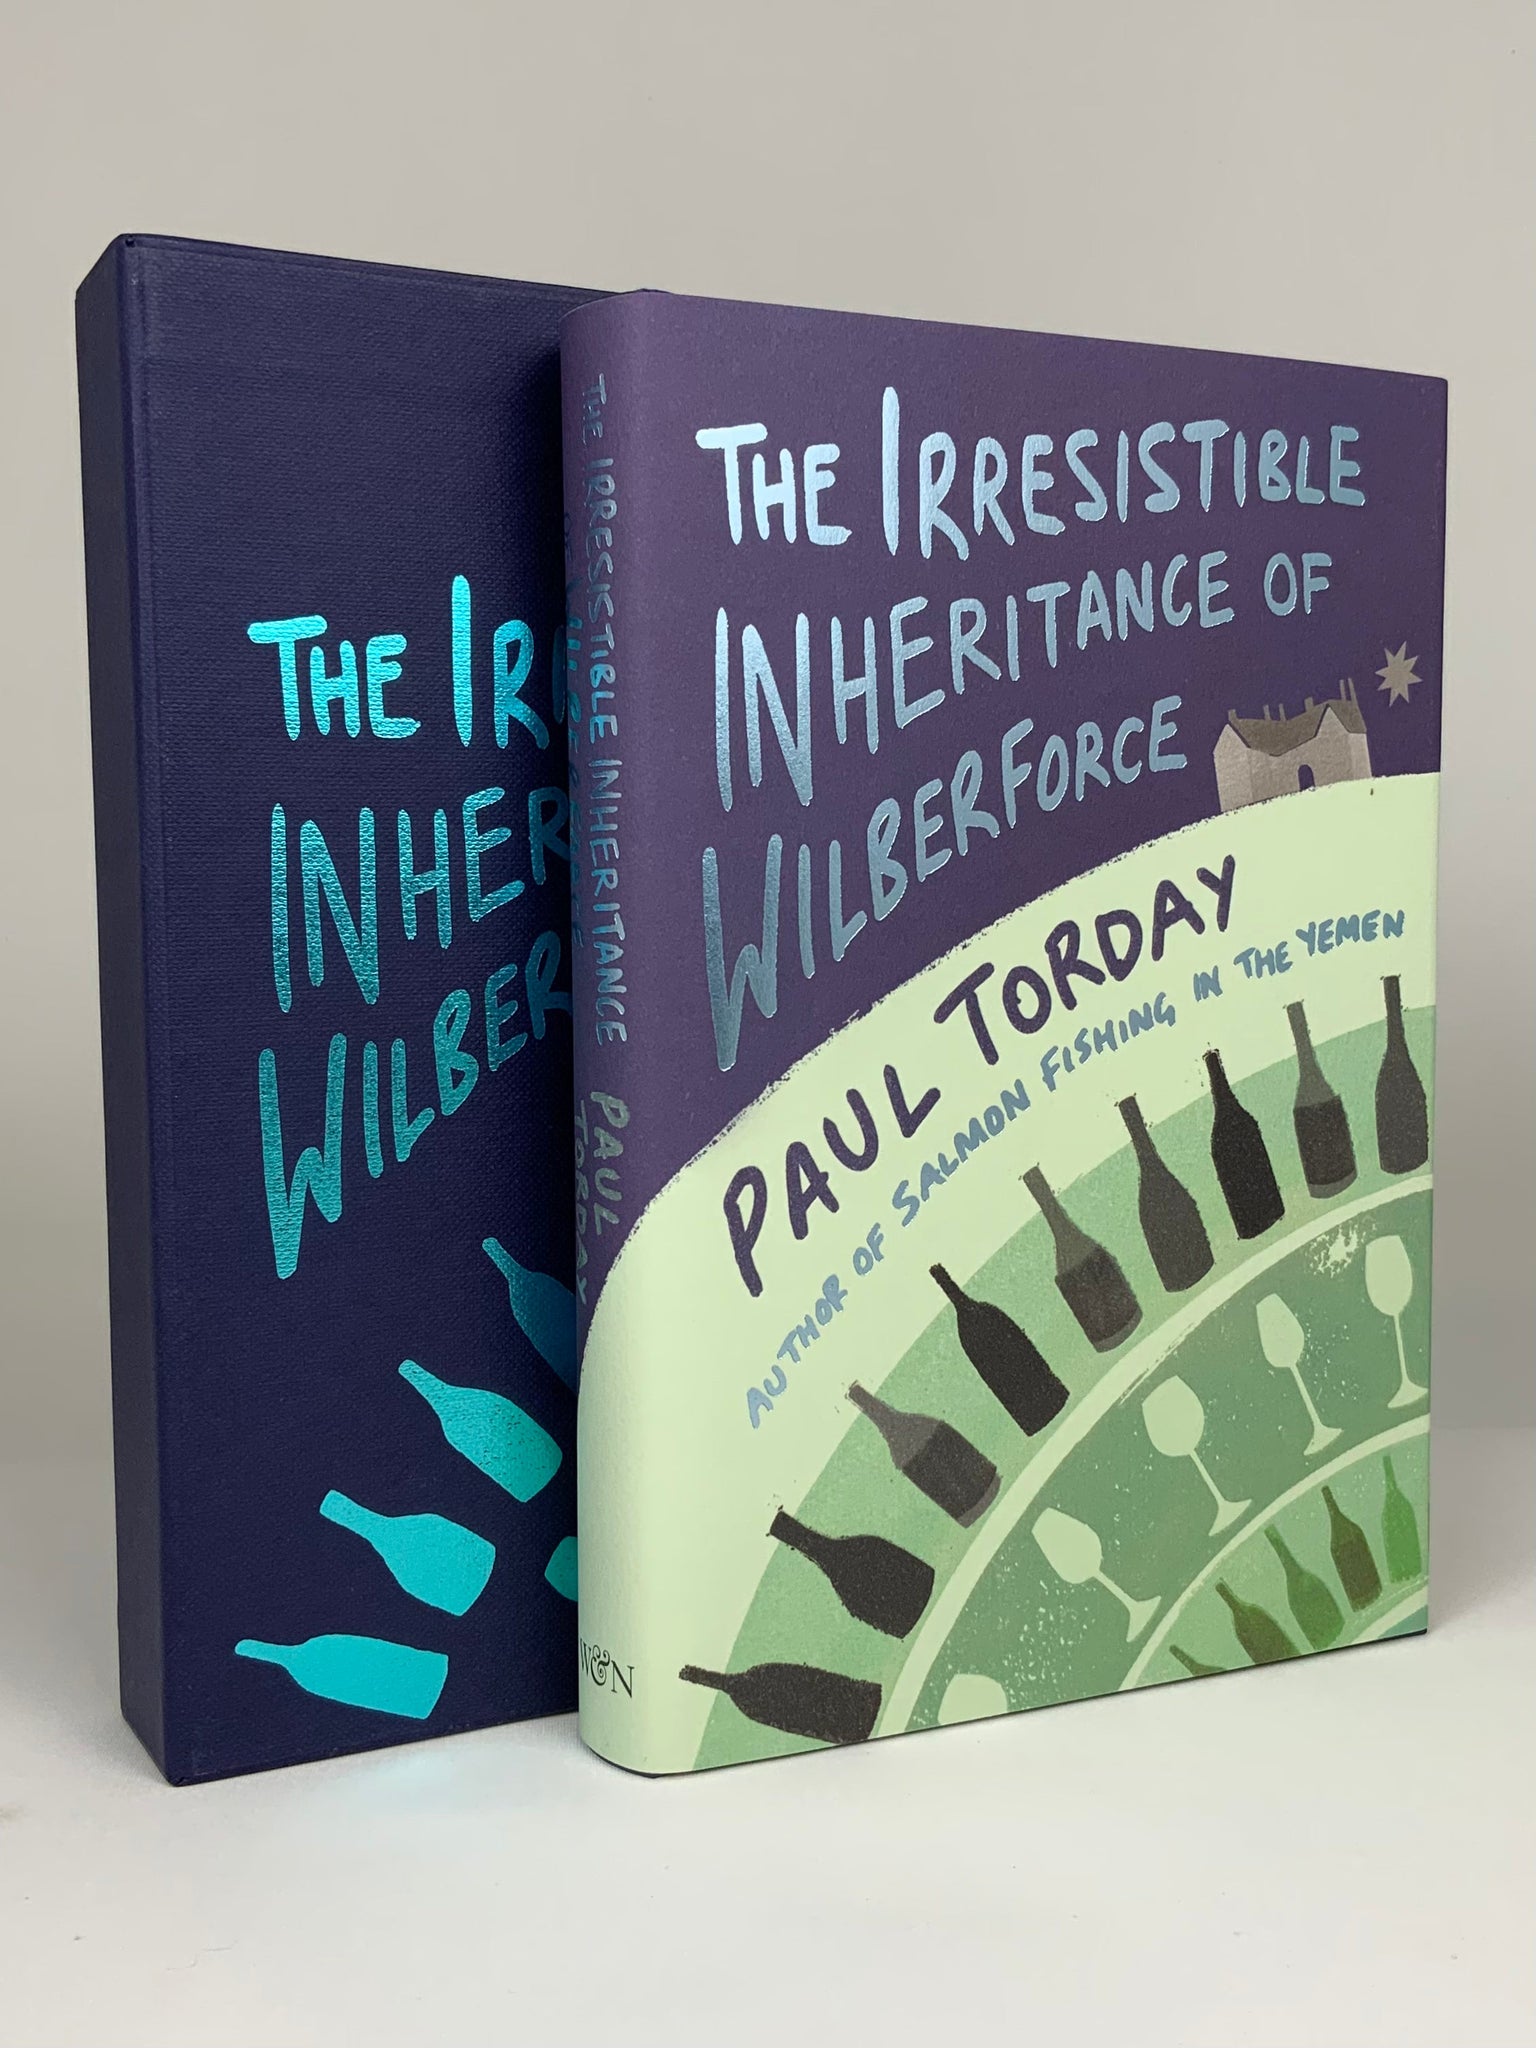 The Irresistable Inheritence of Wilberforce